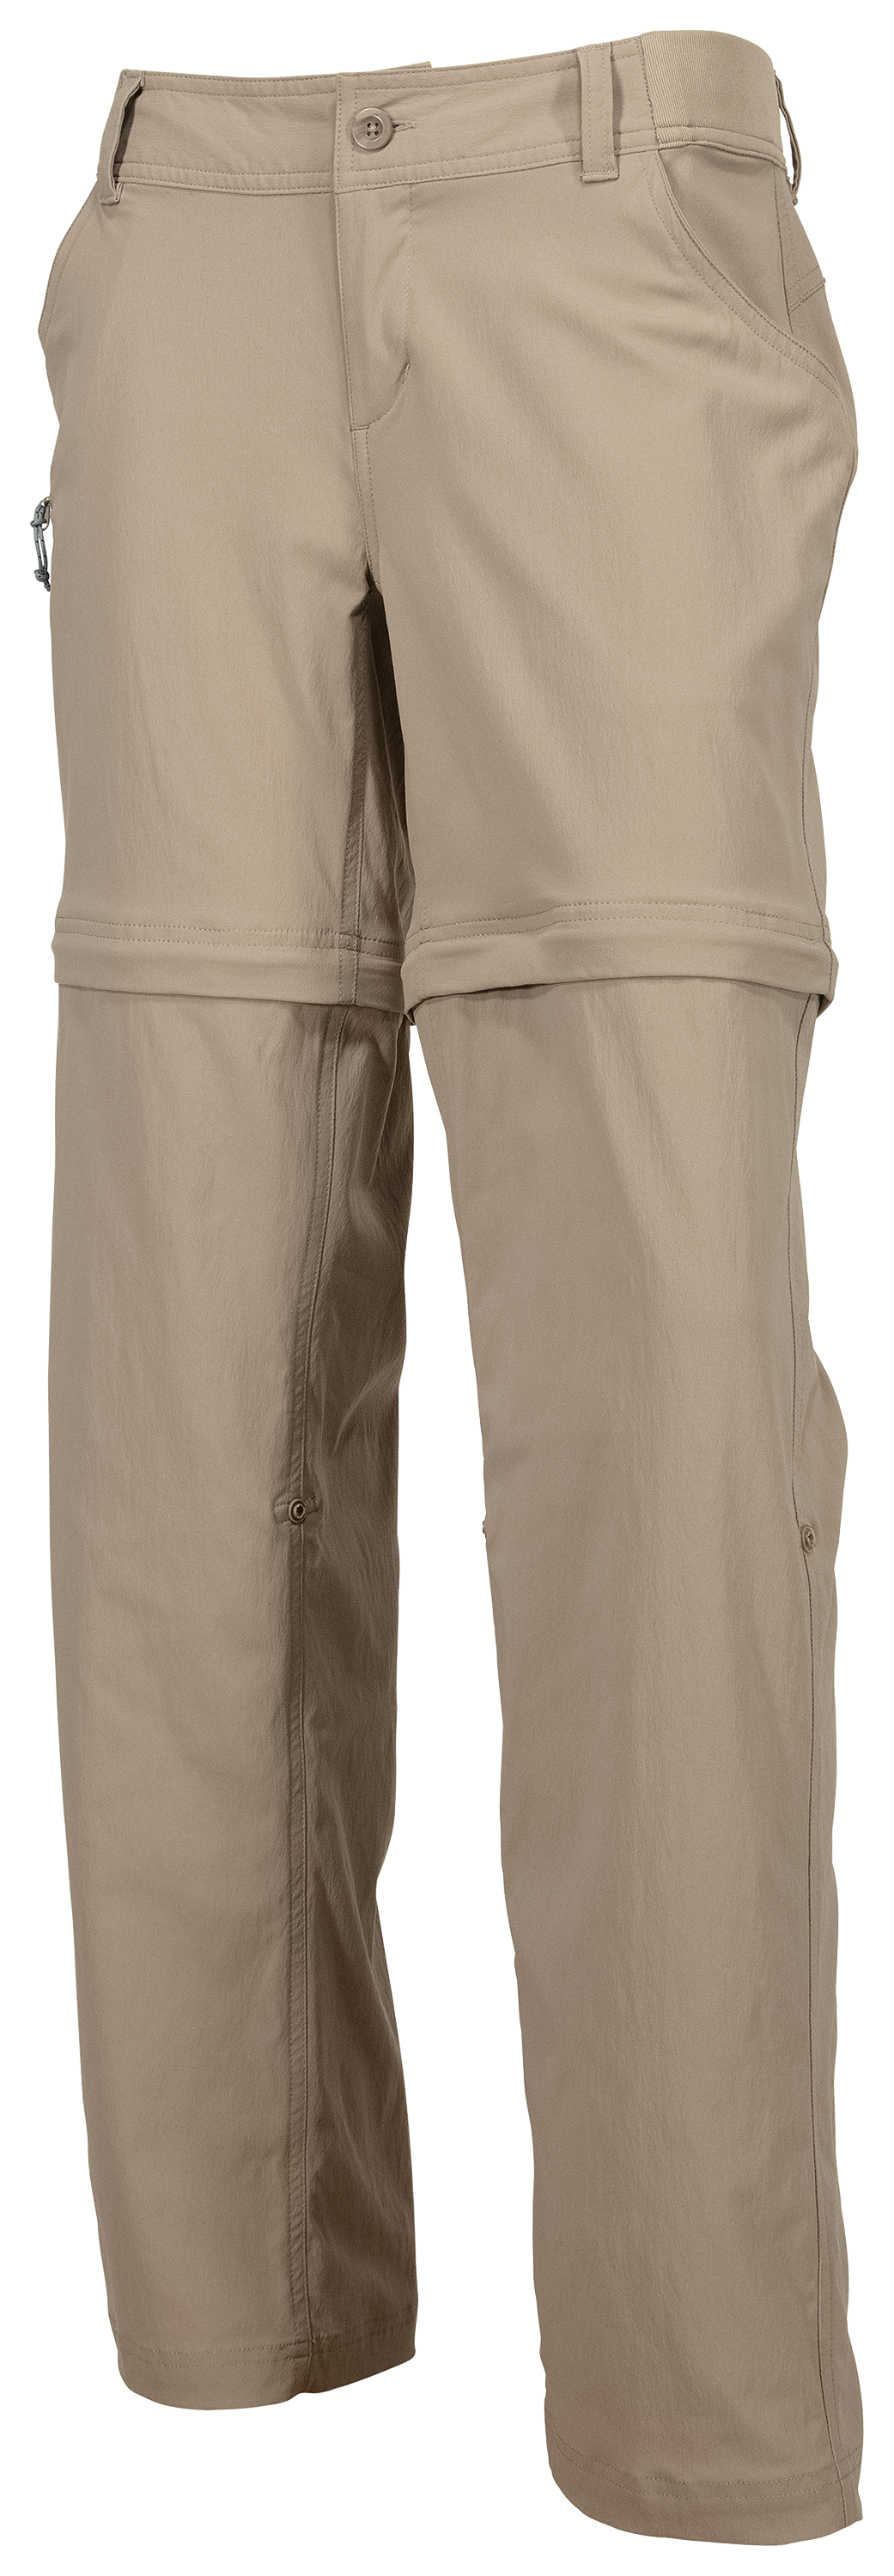 World Wide Sportsman Clearwater Convertible Pants for Ladies